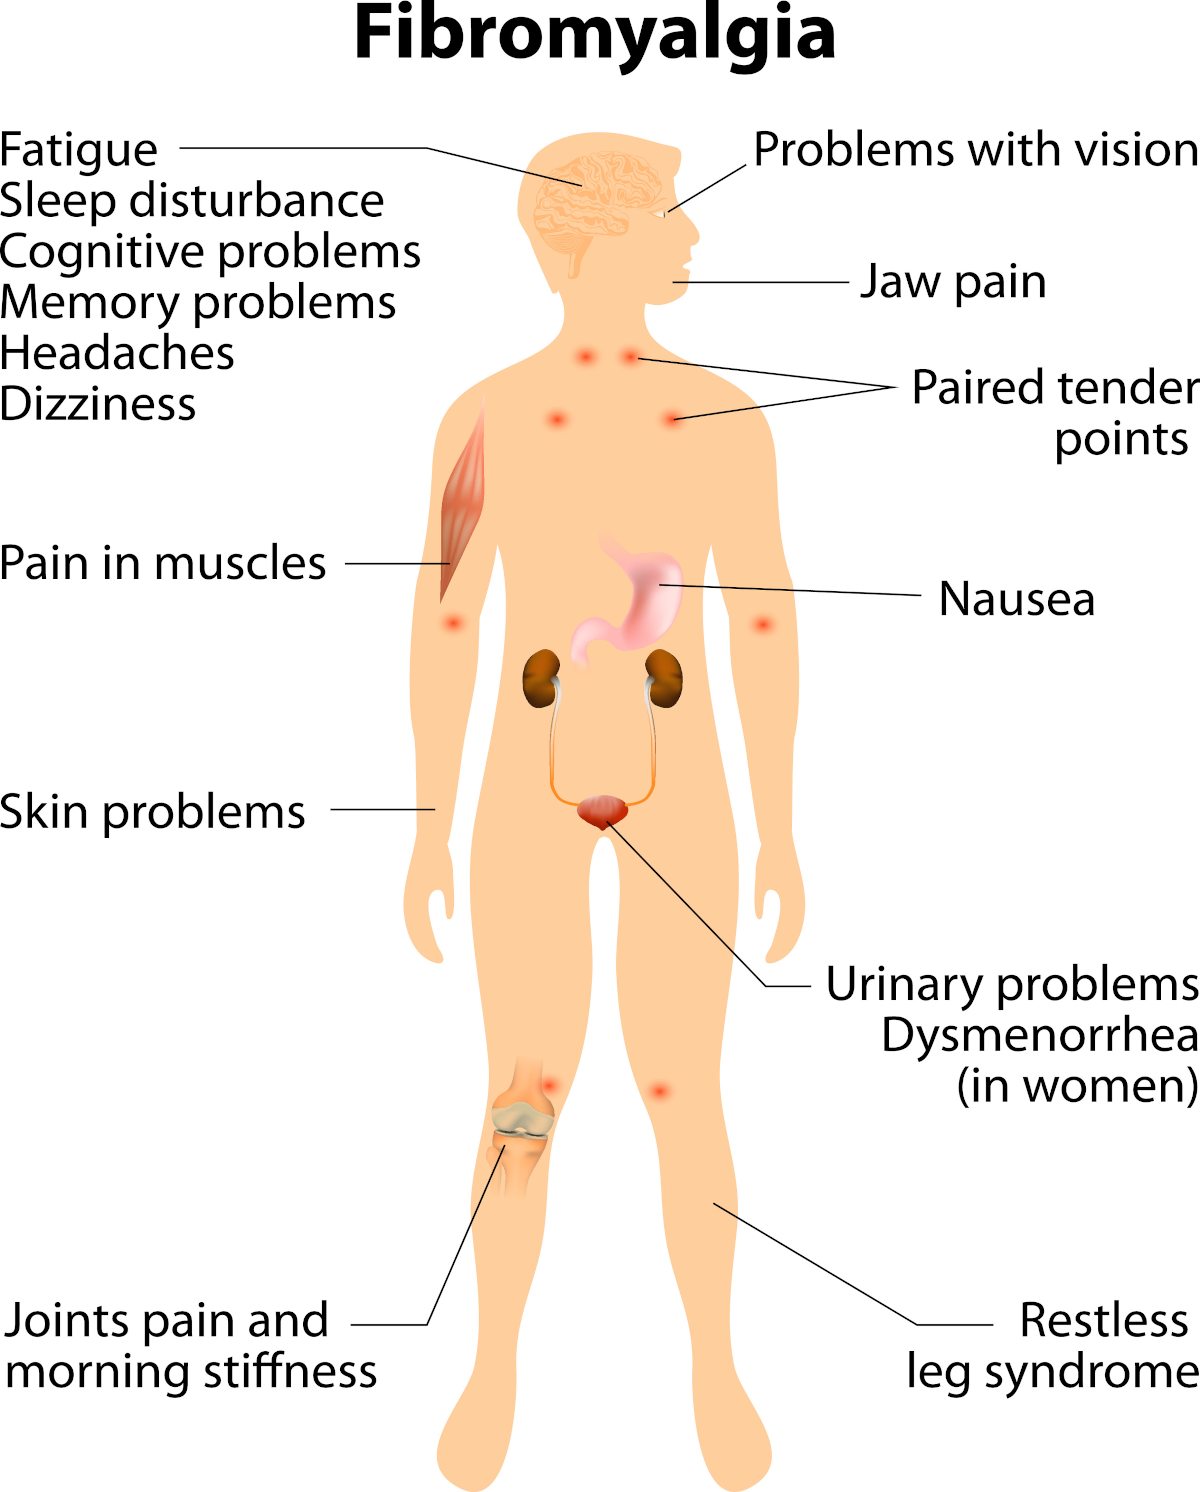 THE DIFFICULTIES IN DIAGNOSING AND TREATING FIBROMYALGIA disease